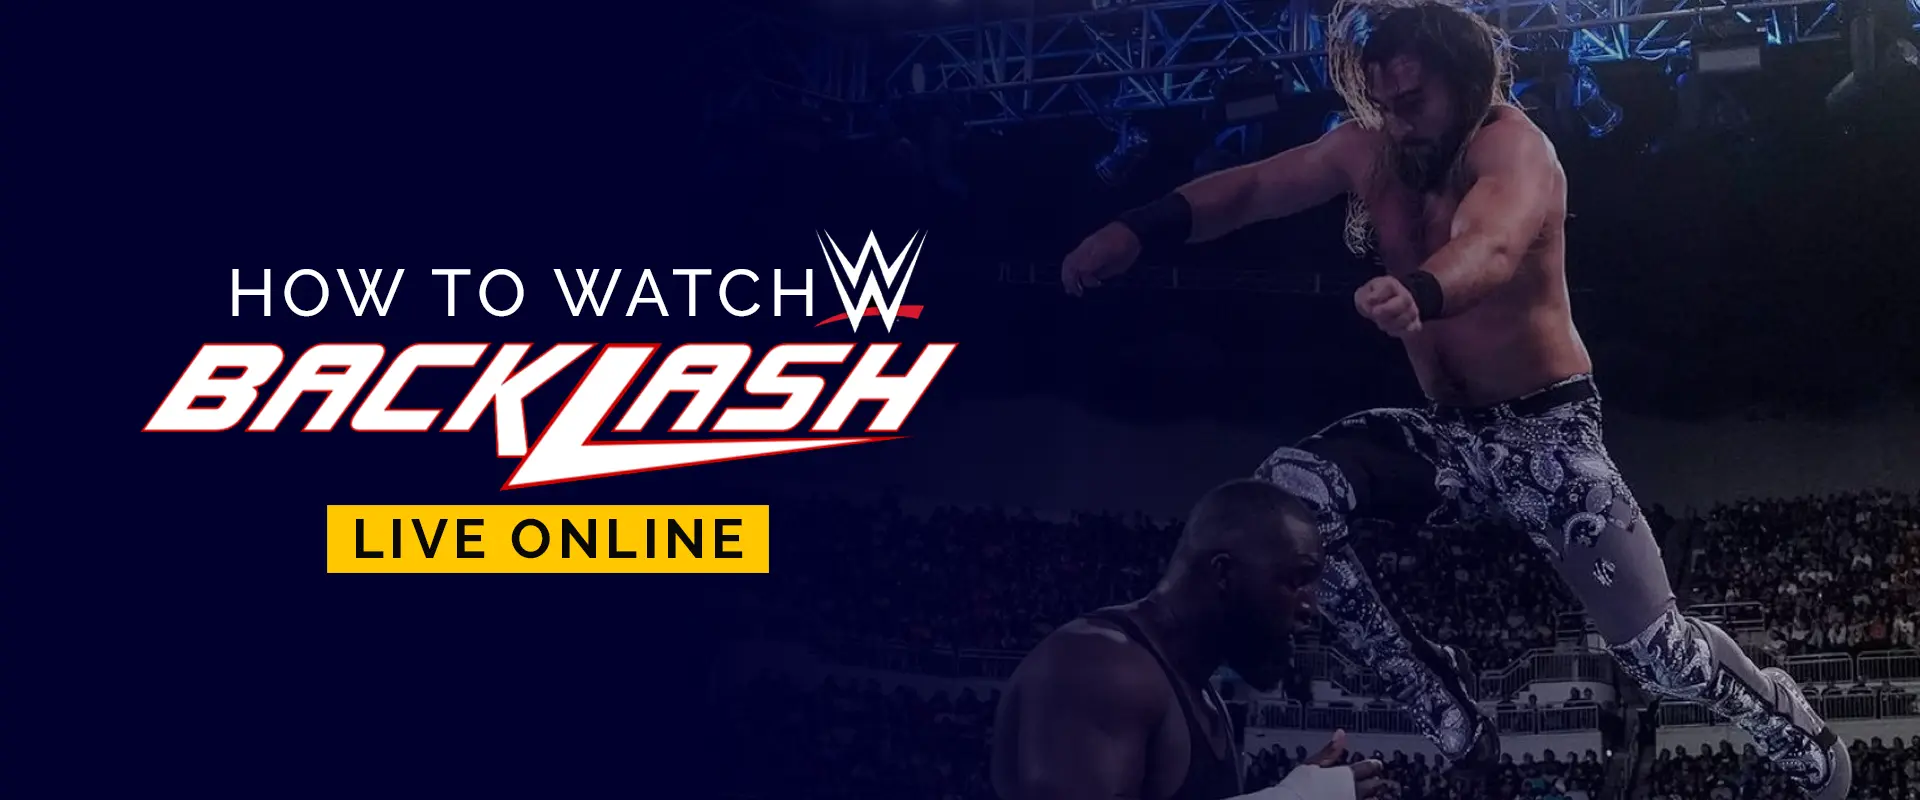 How to Watch WWE Backlash Live Online